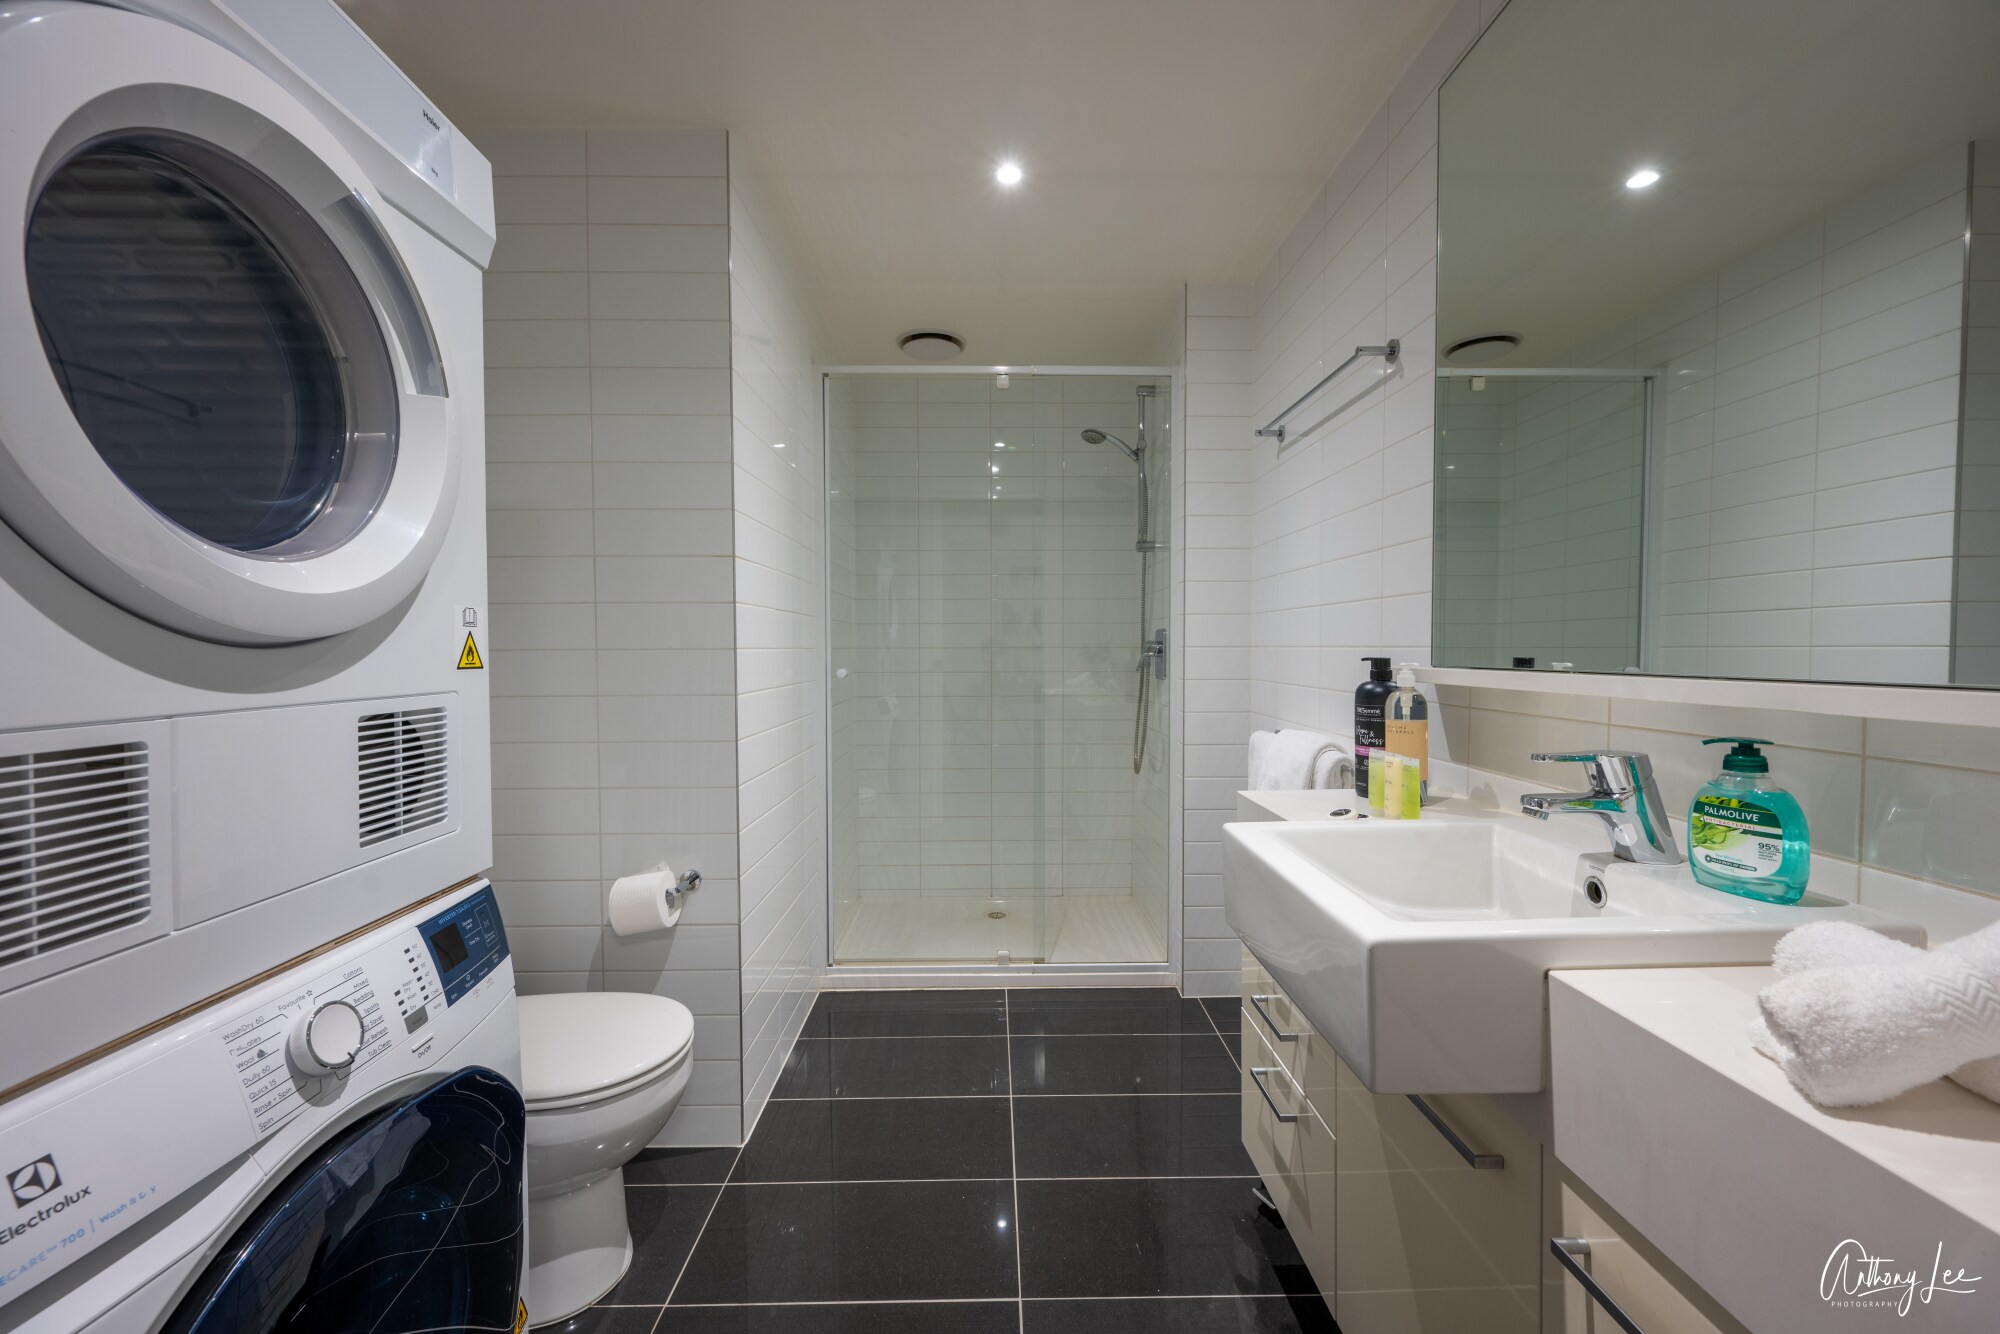 The sparkling main bathroom comes stocked with all the essentials for your stay